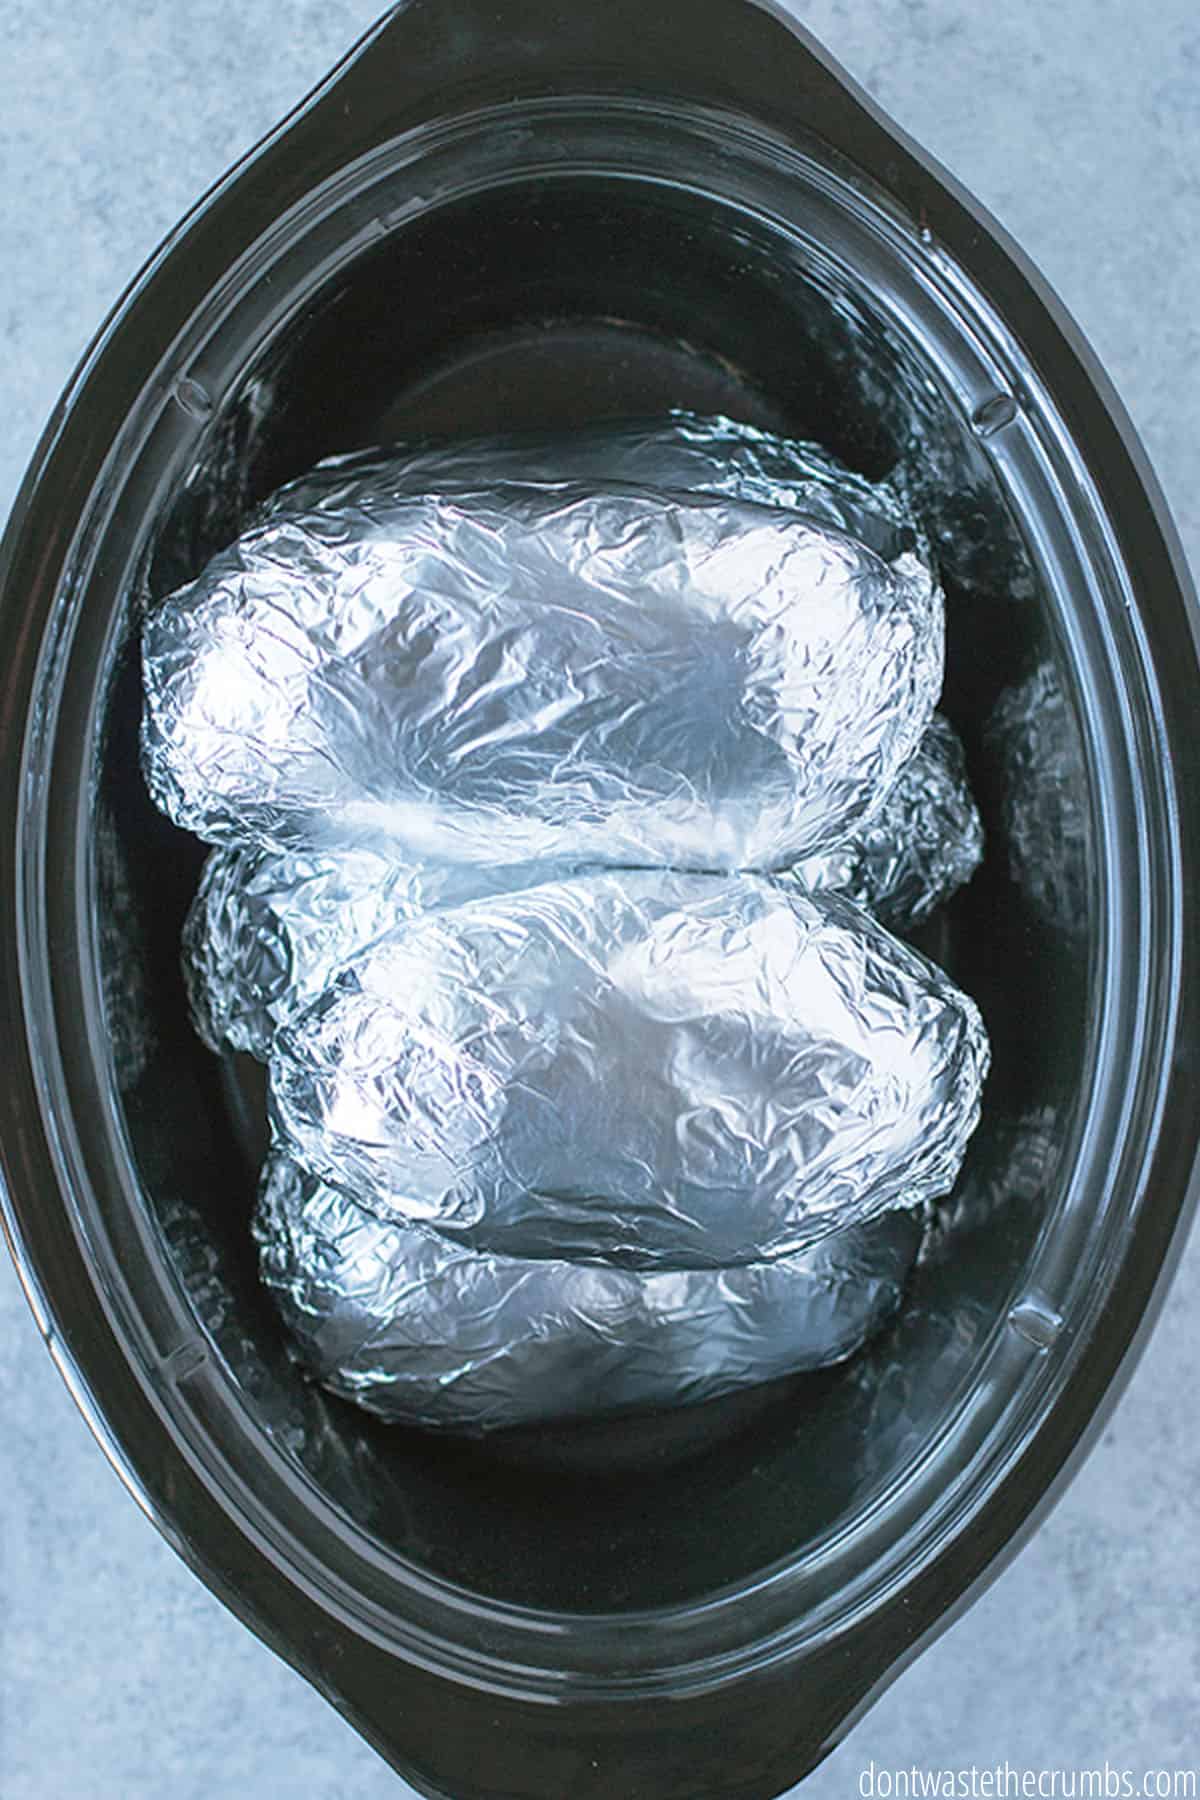 A black oval slow cooker holds 6 potatoes wrapped in foil ready for slow cooking.